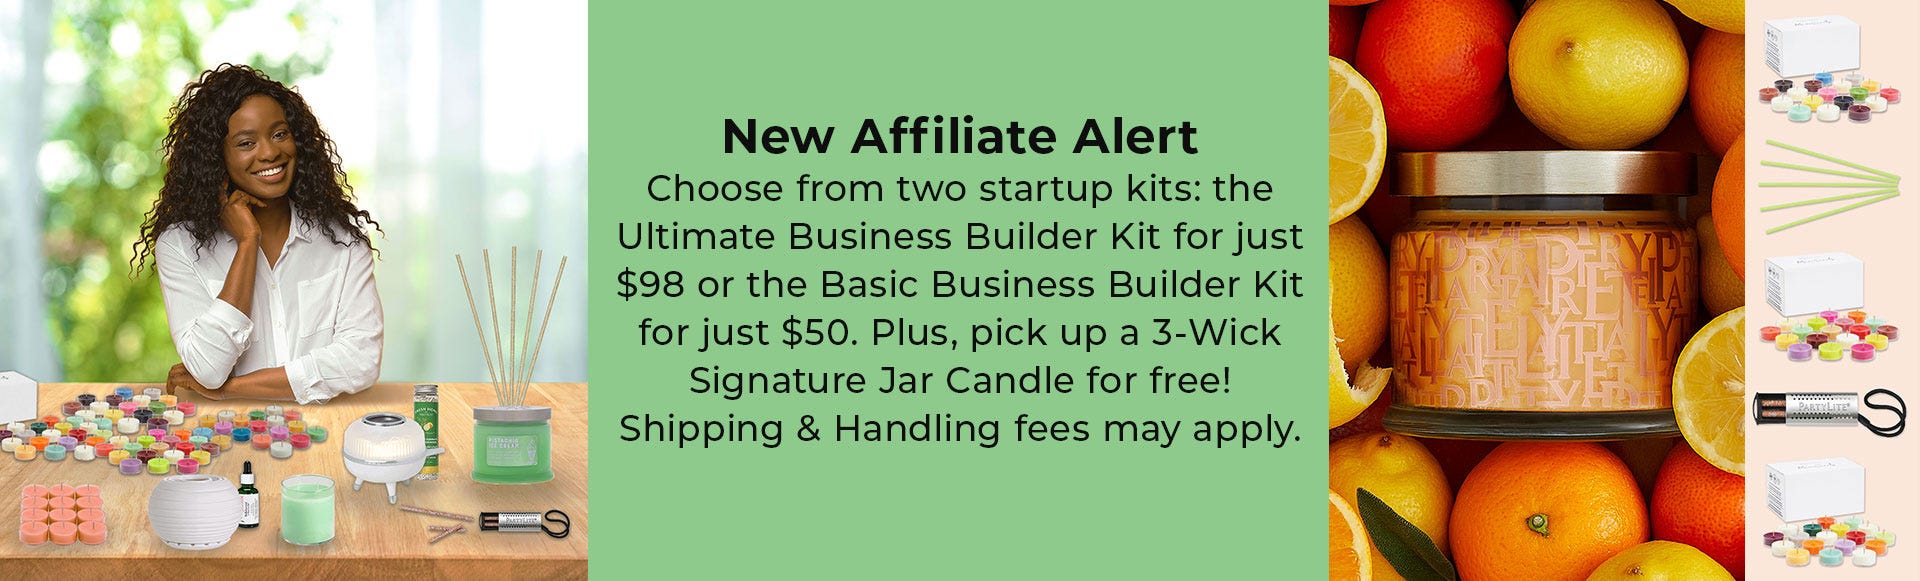 New Affiliate Alert!  Choose from two startup kits: the Ultimate Business Builder Kit for just $98 or the Basic Business Builder Kit for just $50.  Plus, pick up a 3-Wick Signature Jar Candle for free!